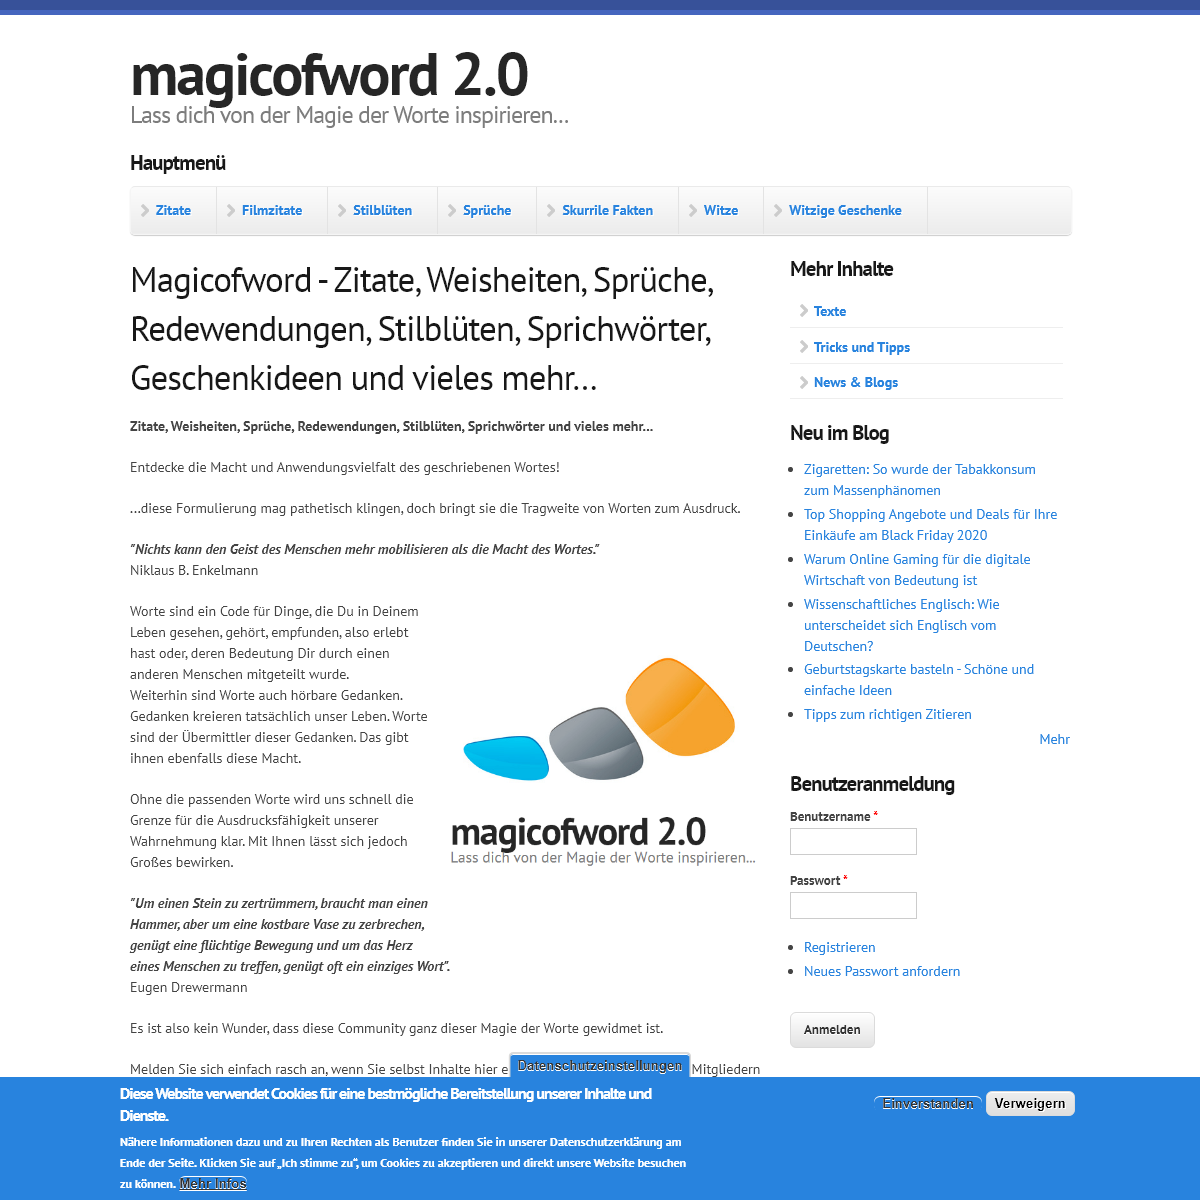 A complete backup of magicofword.com